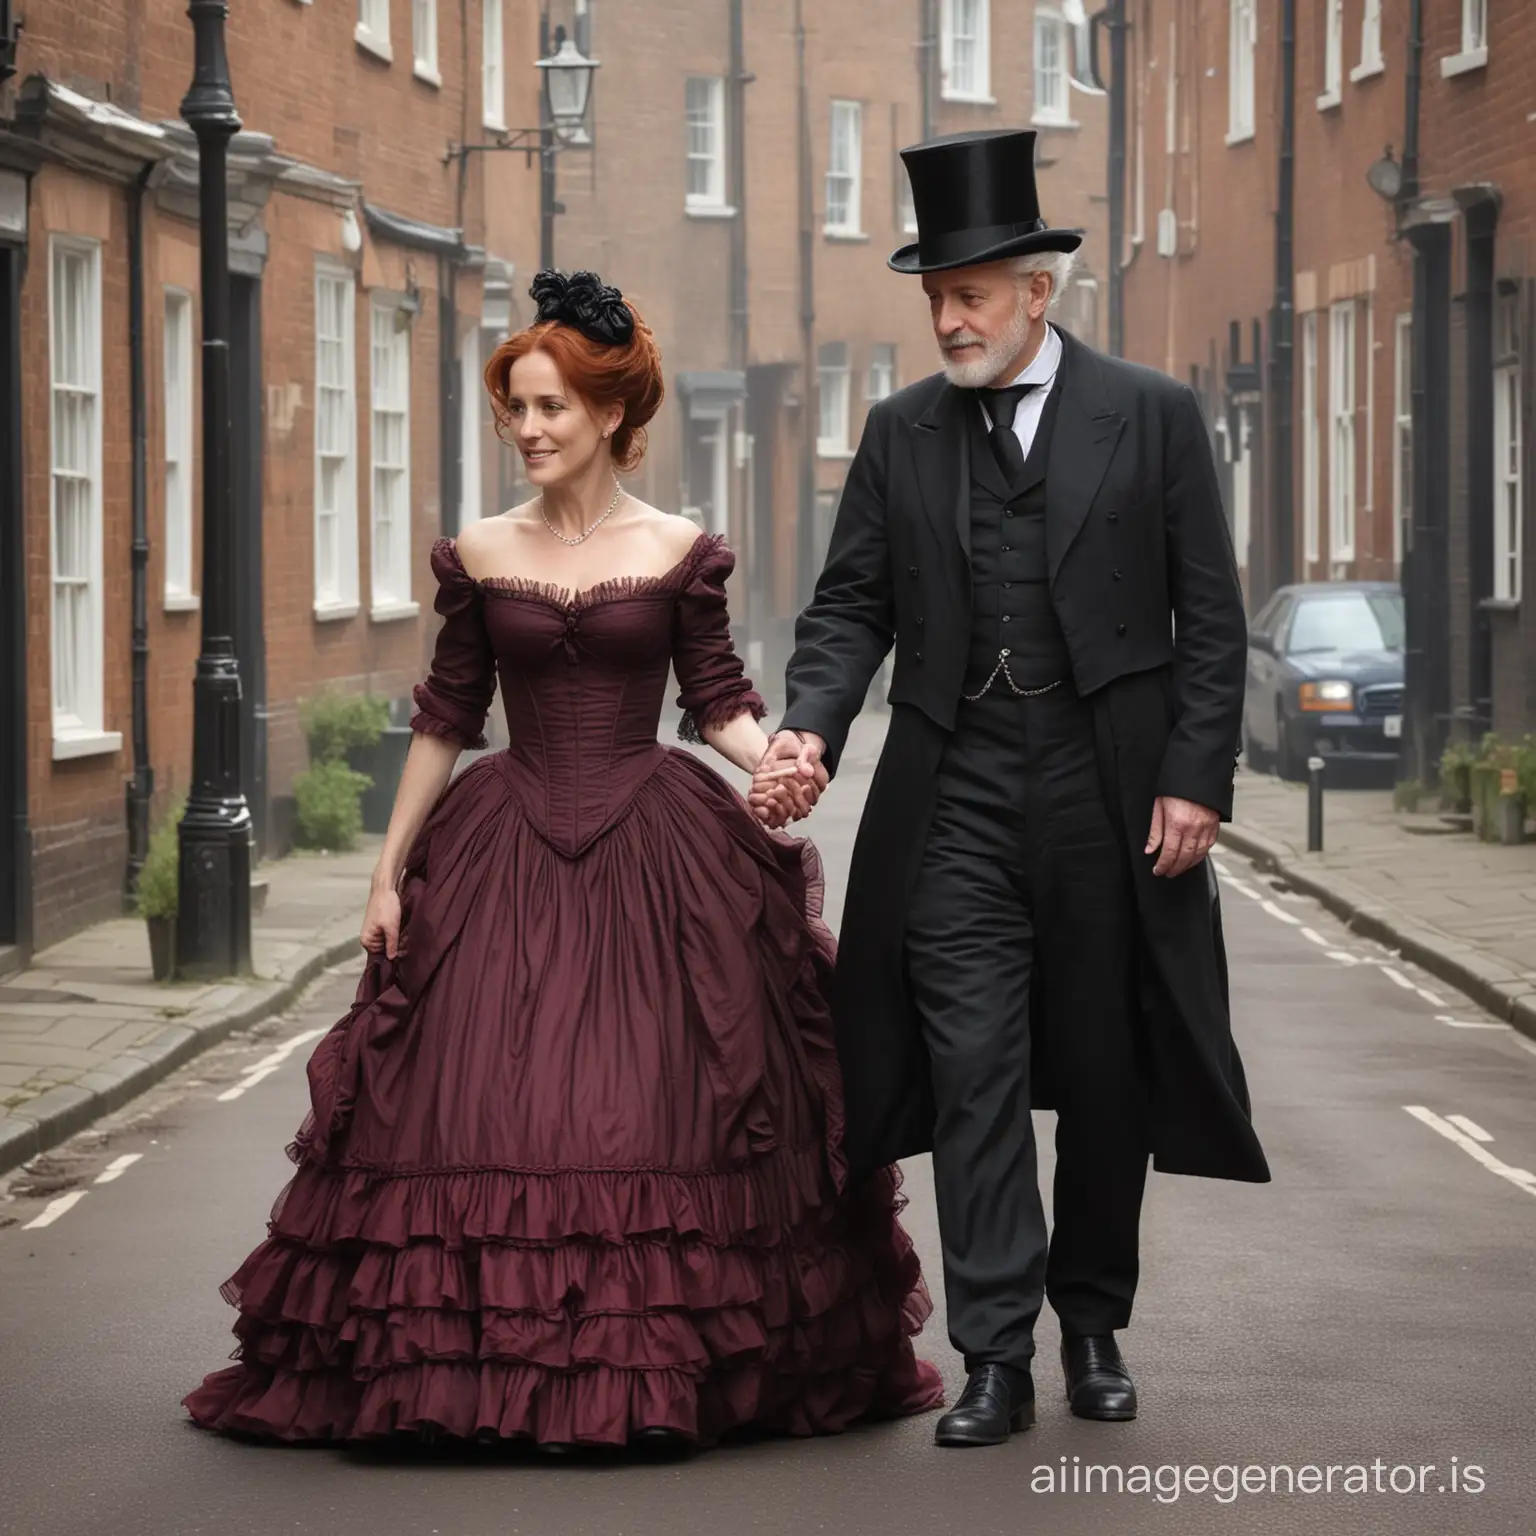 red hair Gillian Anderson wearing a dark maroon floor-length loose billowing 1860 Victorian crinoline poofy dress with a frilly bonnet walking on Victorian era street with an old man dressed into a black Victorian suit who seems to be her newlywed husband